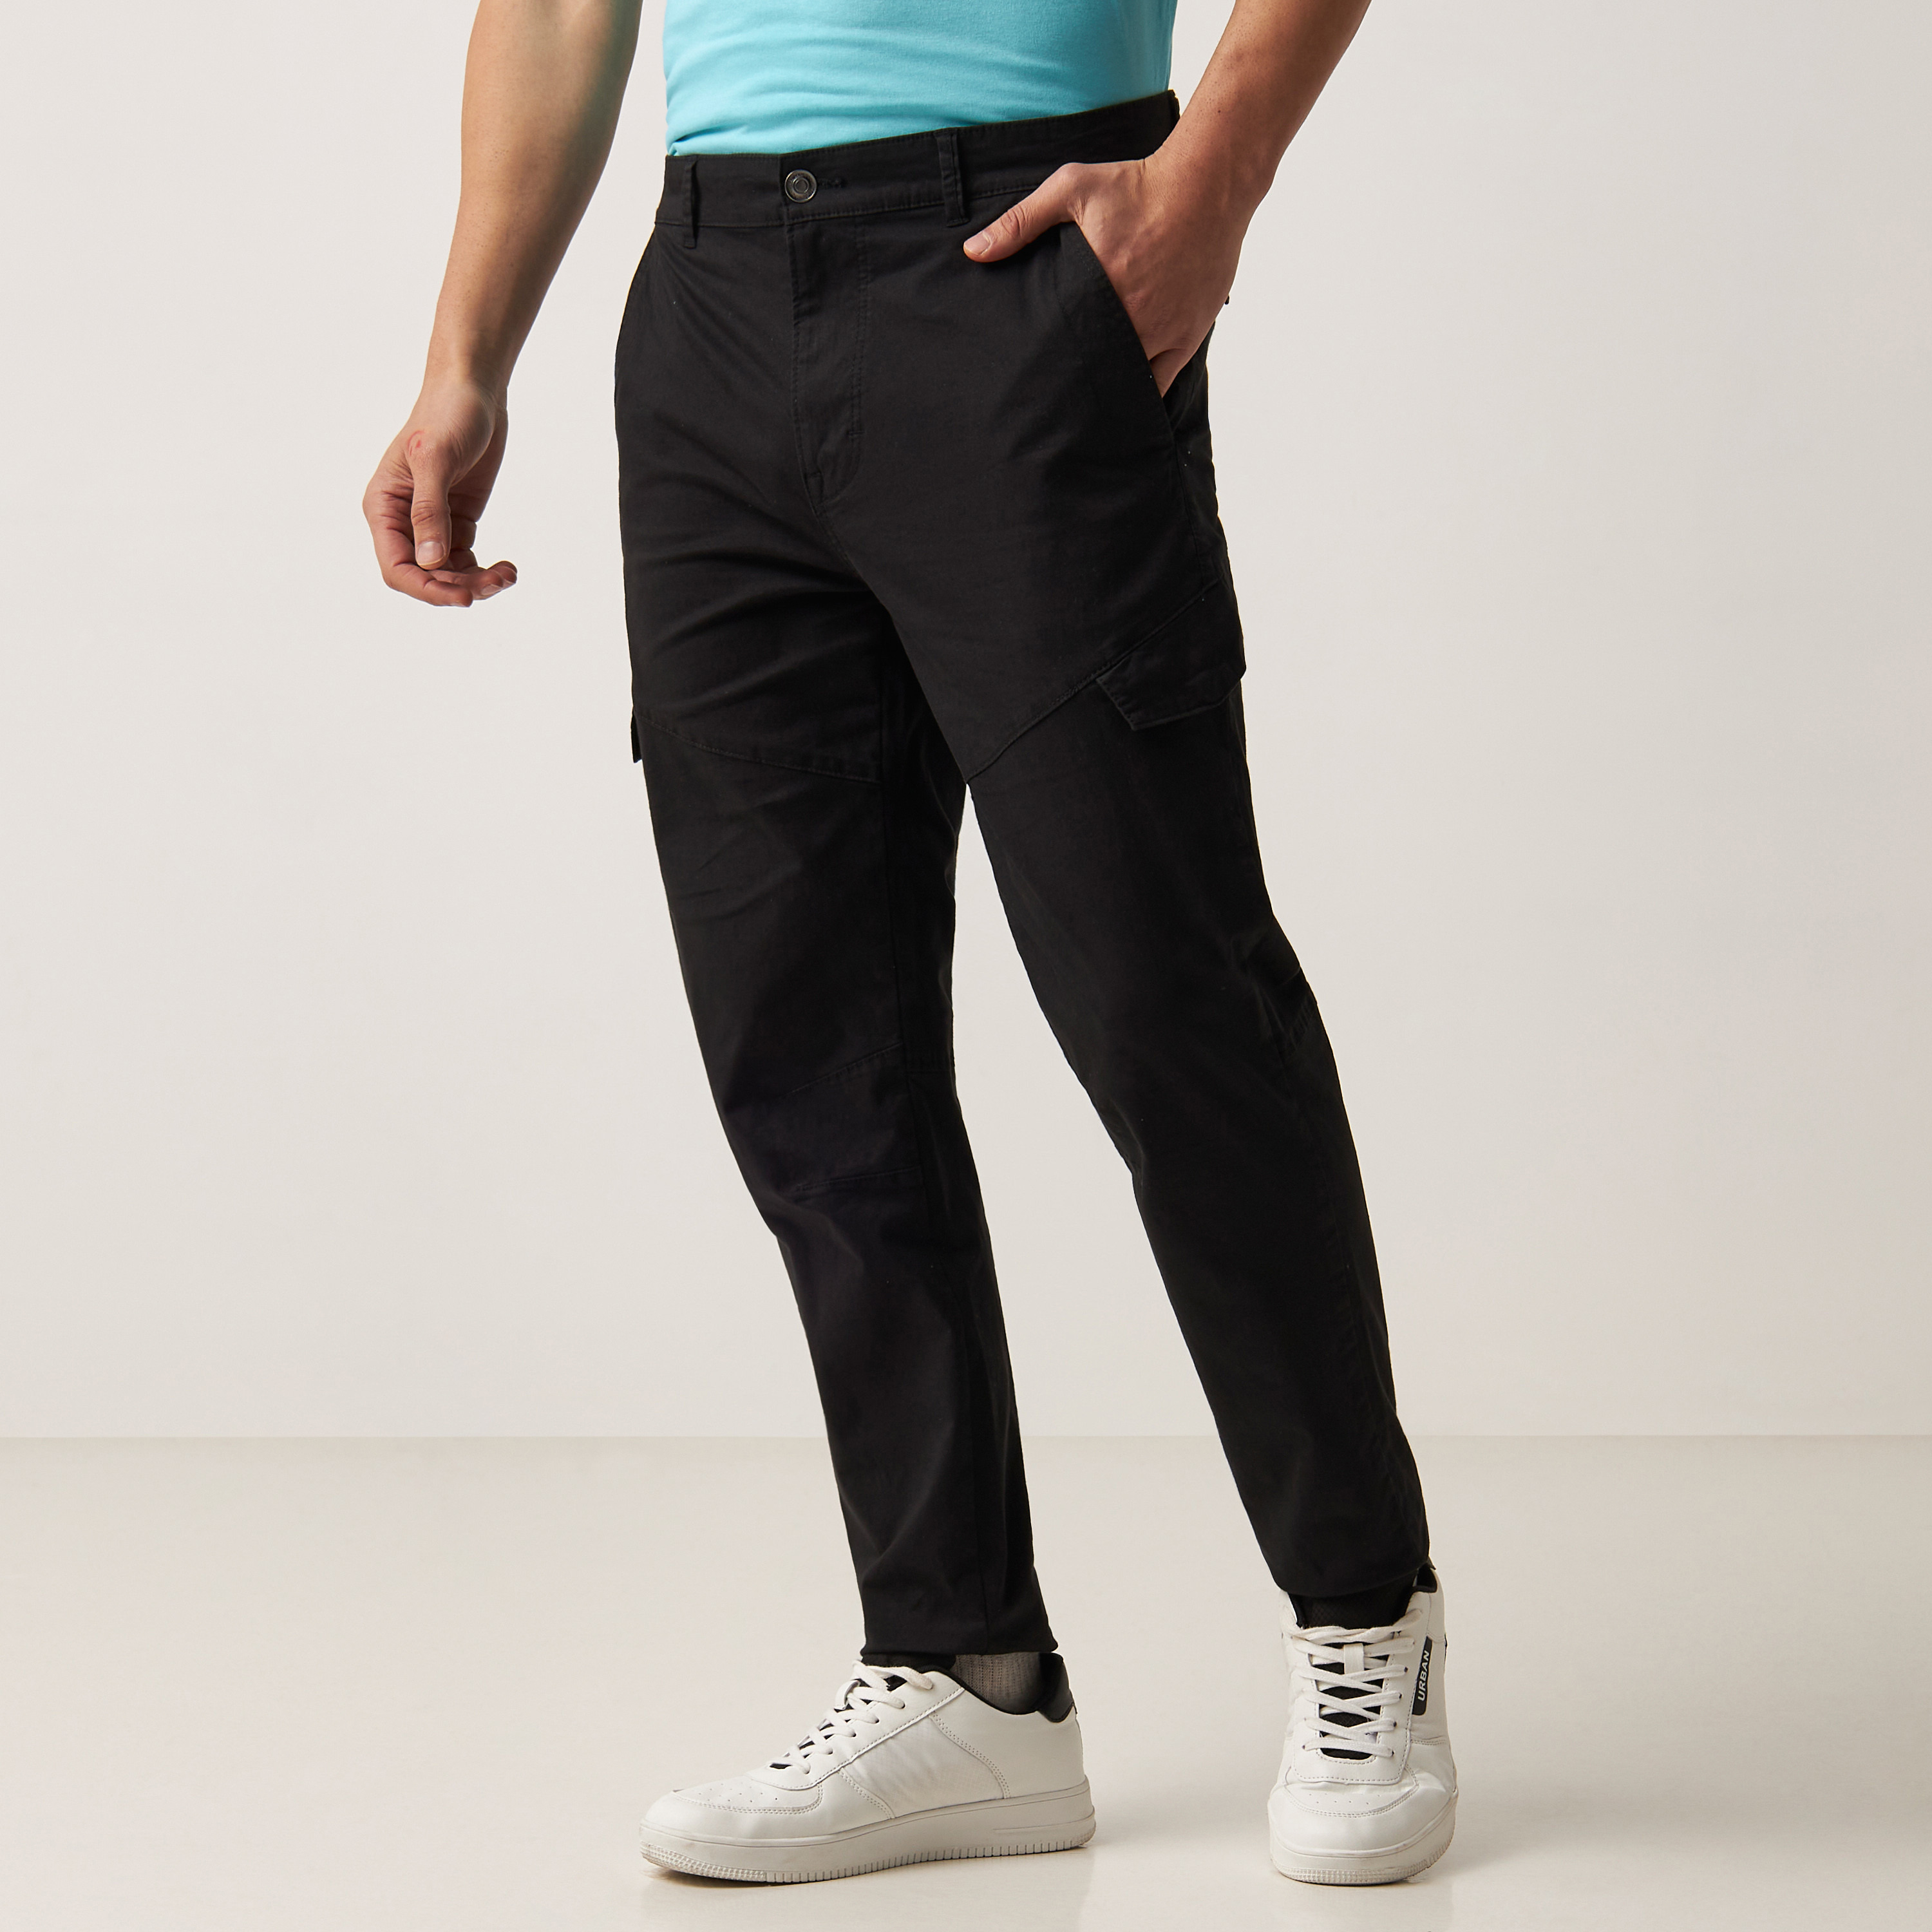 Buy White Baggy Fit Chinos Cotton Cargo Pants Online | Tistabene - Tistabene